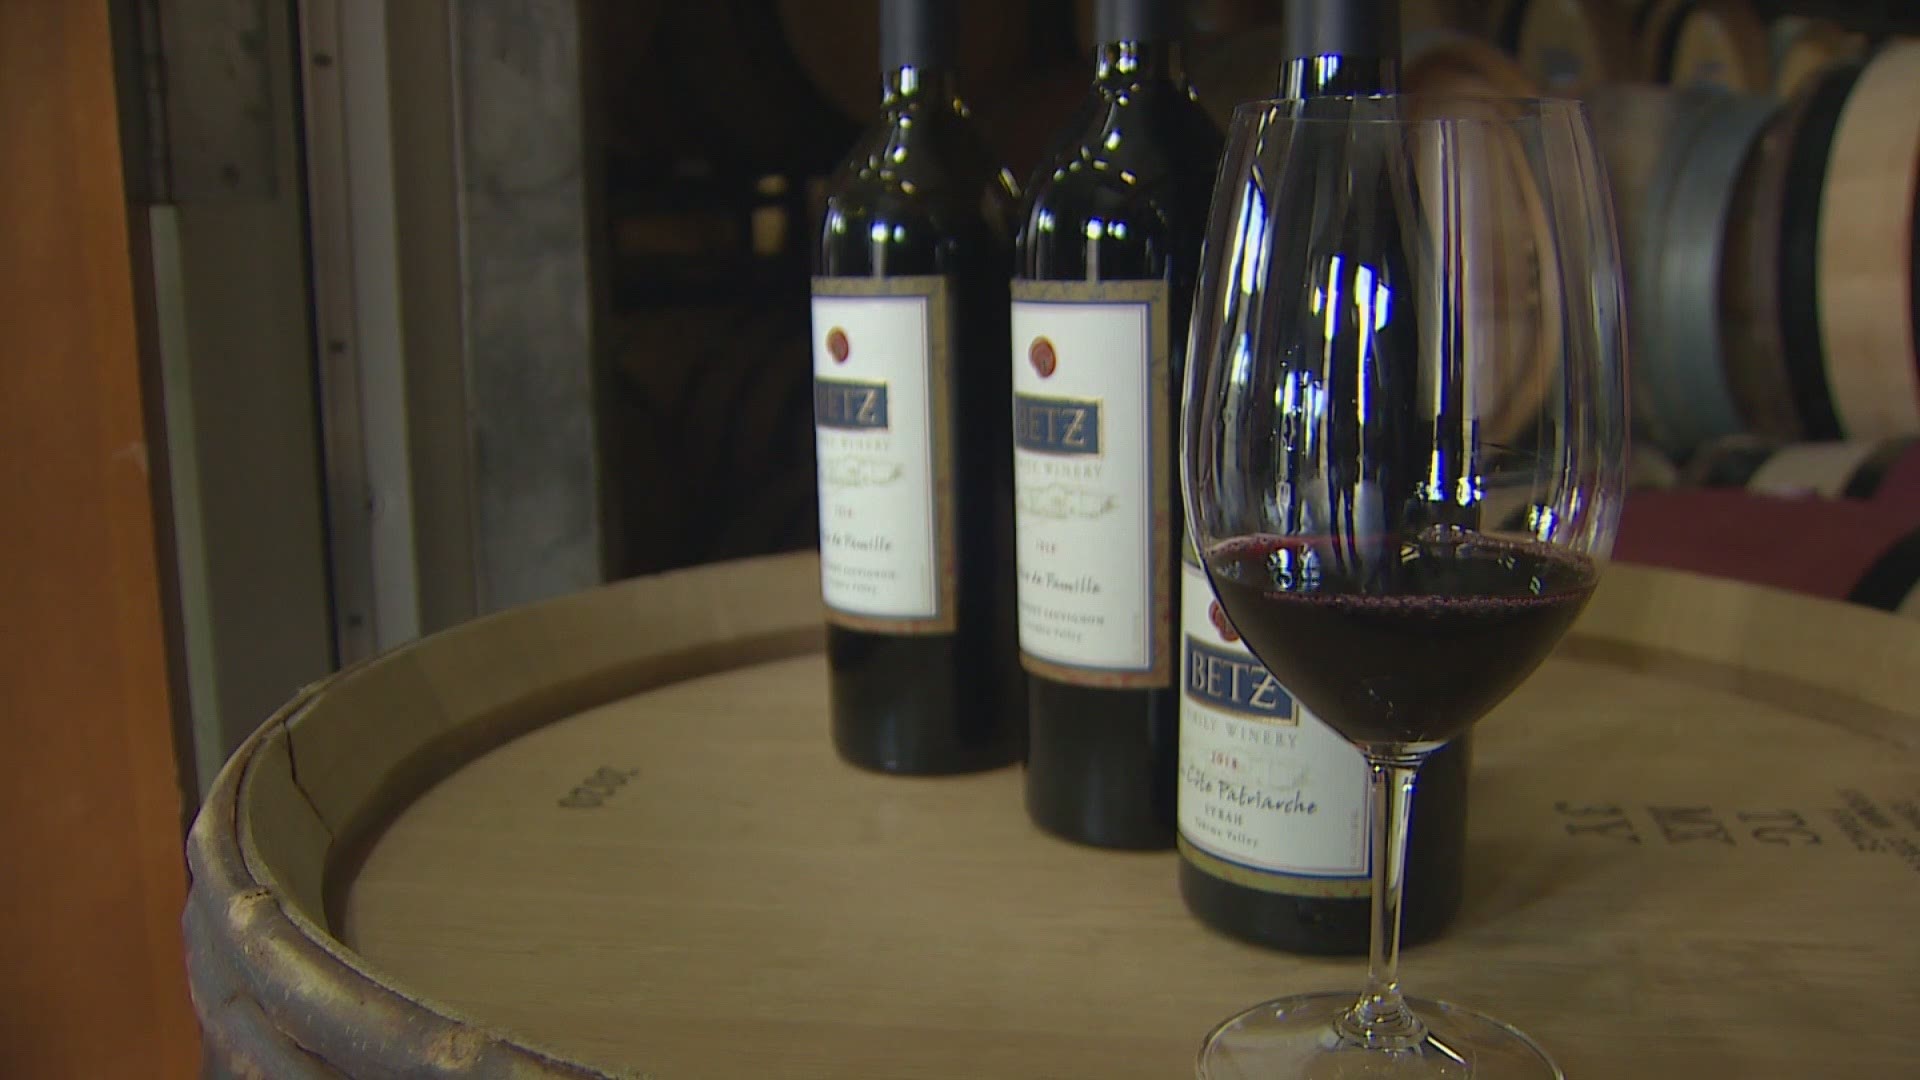 Betz Family Winery owners said last year's wildfires in Washington, Oregon and California impacted the flavor profiles of their latest vintage.